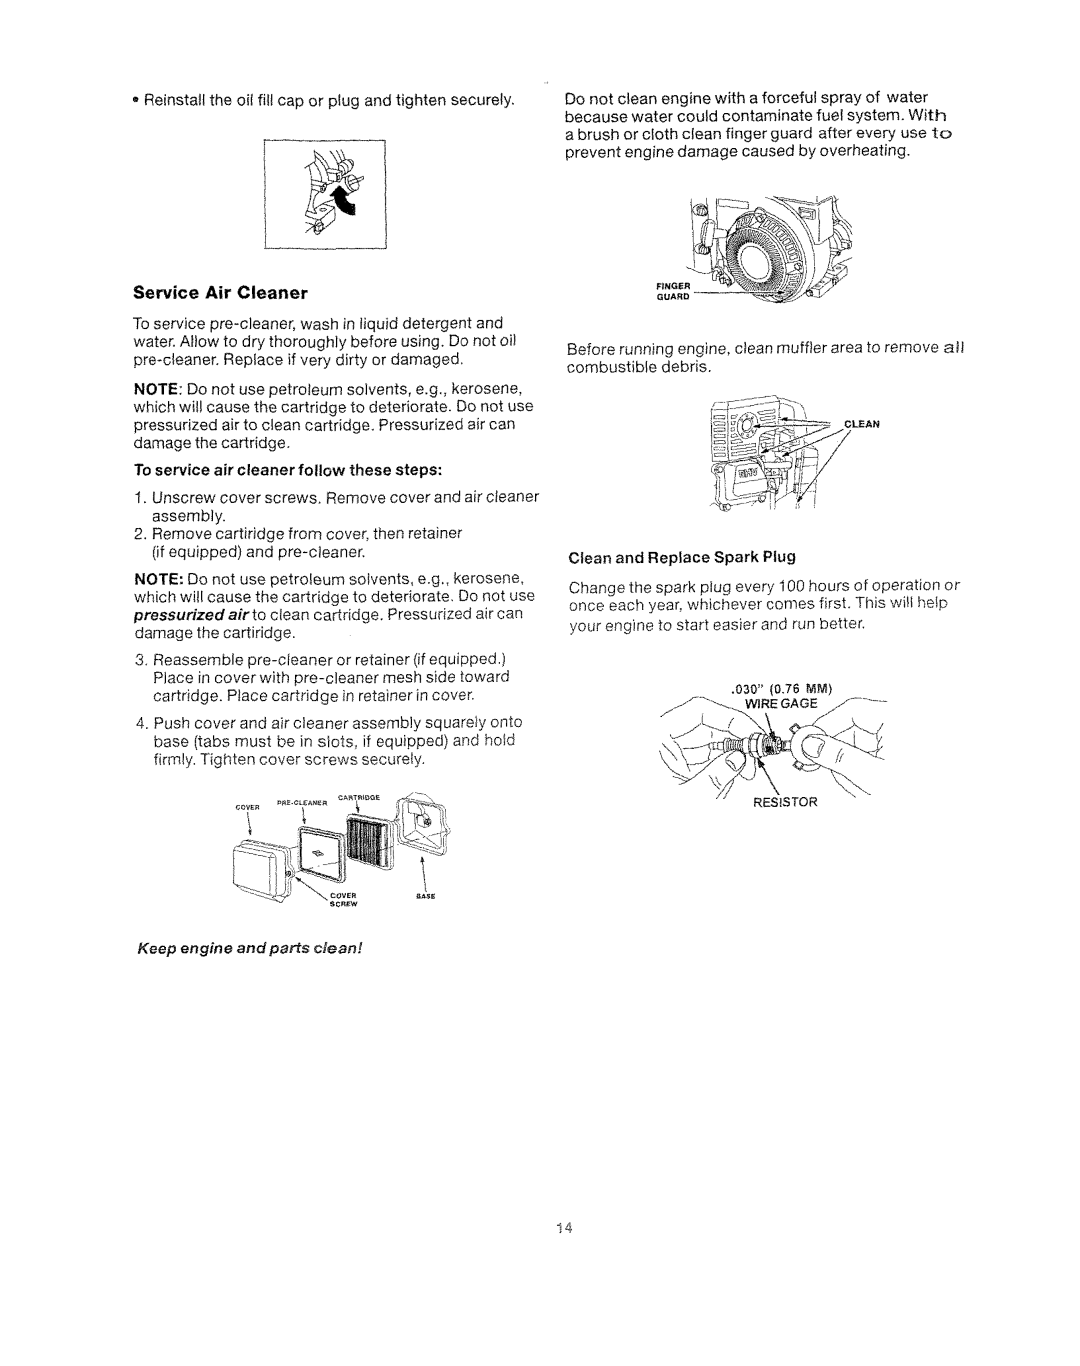 Craftsman 919.762500 manual Service Air Cleaner, To service air cleaner follow these steps 